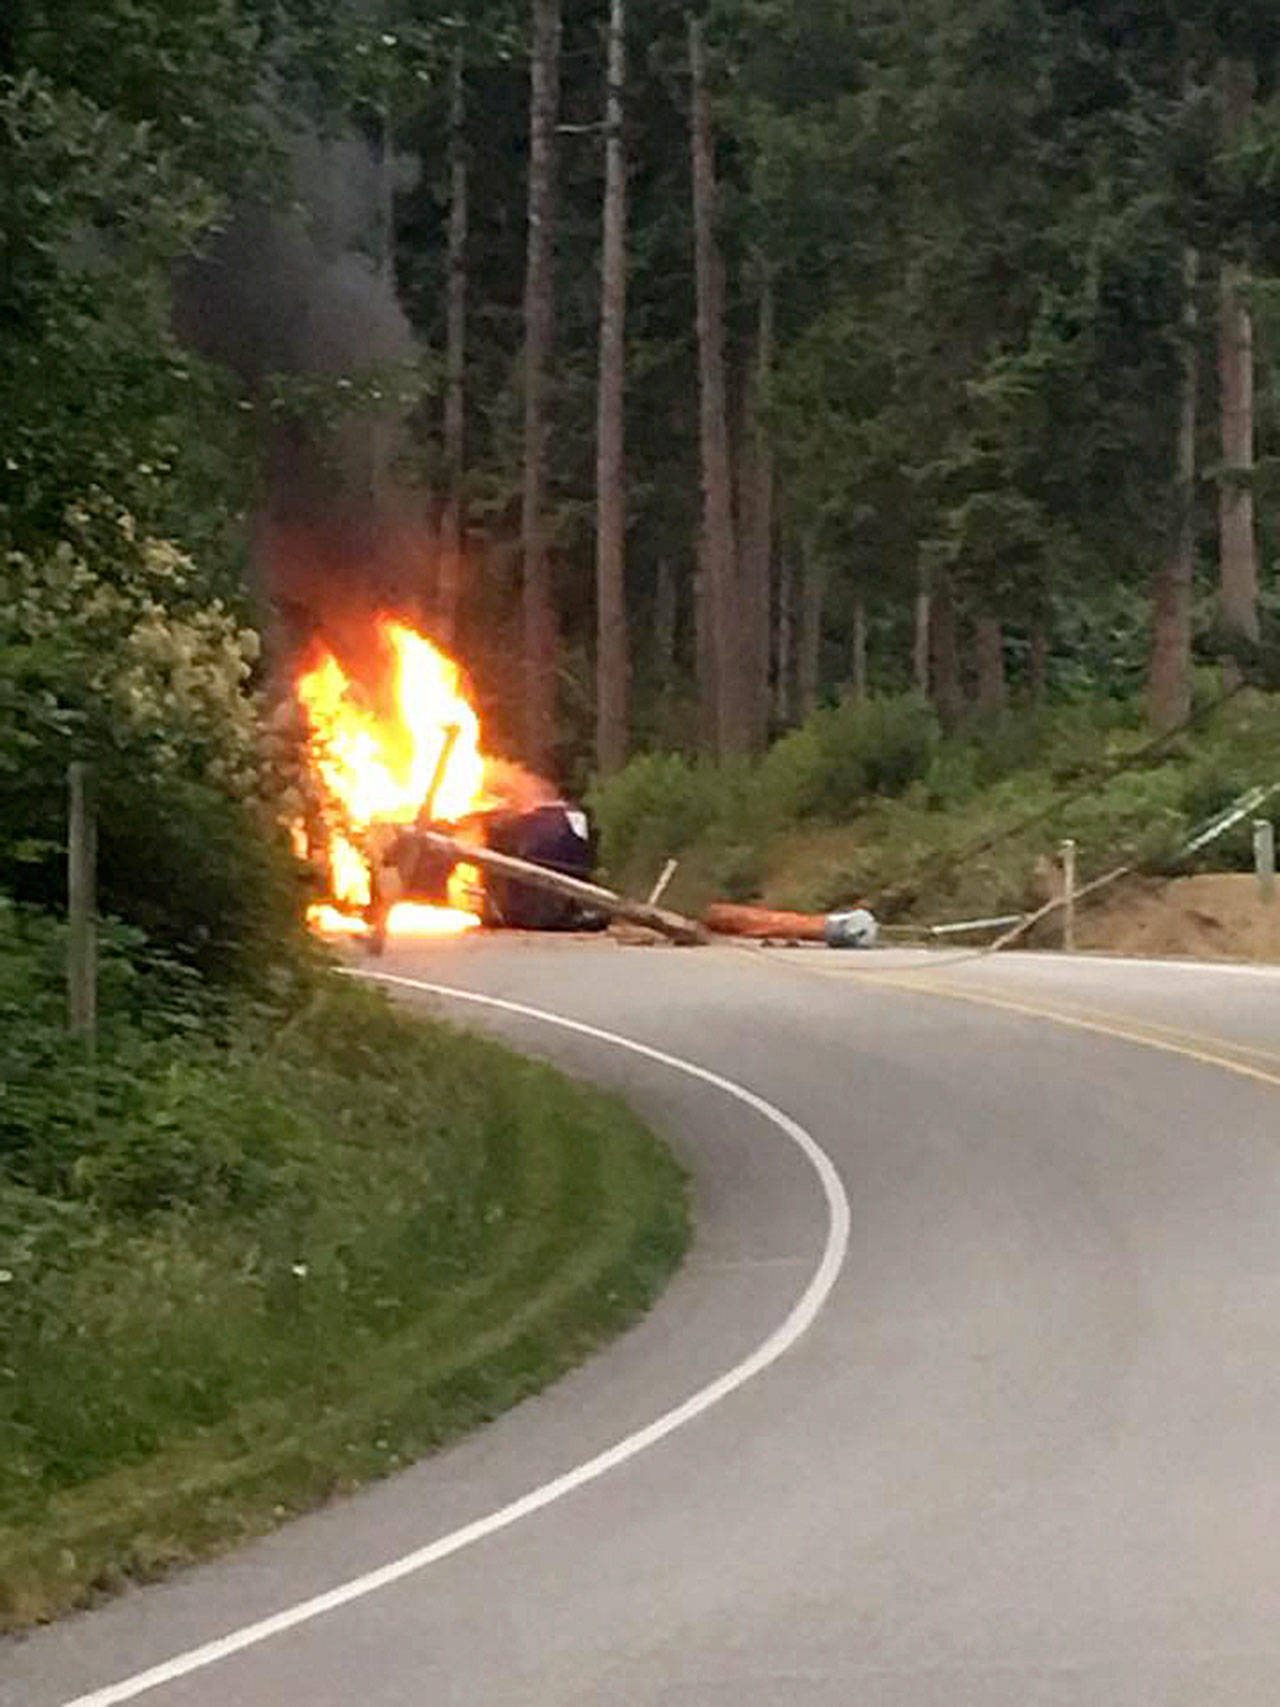 Contributed photo — A black sedan caught fire after colliding with a power pole on Bailey Road Monday morning. The driver escaped without injuries.